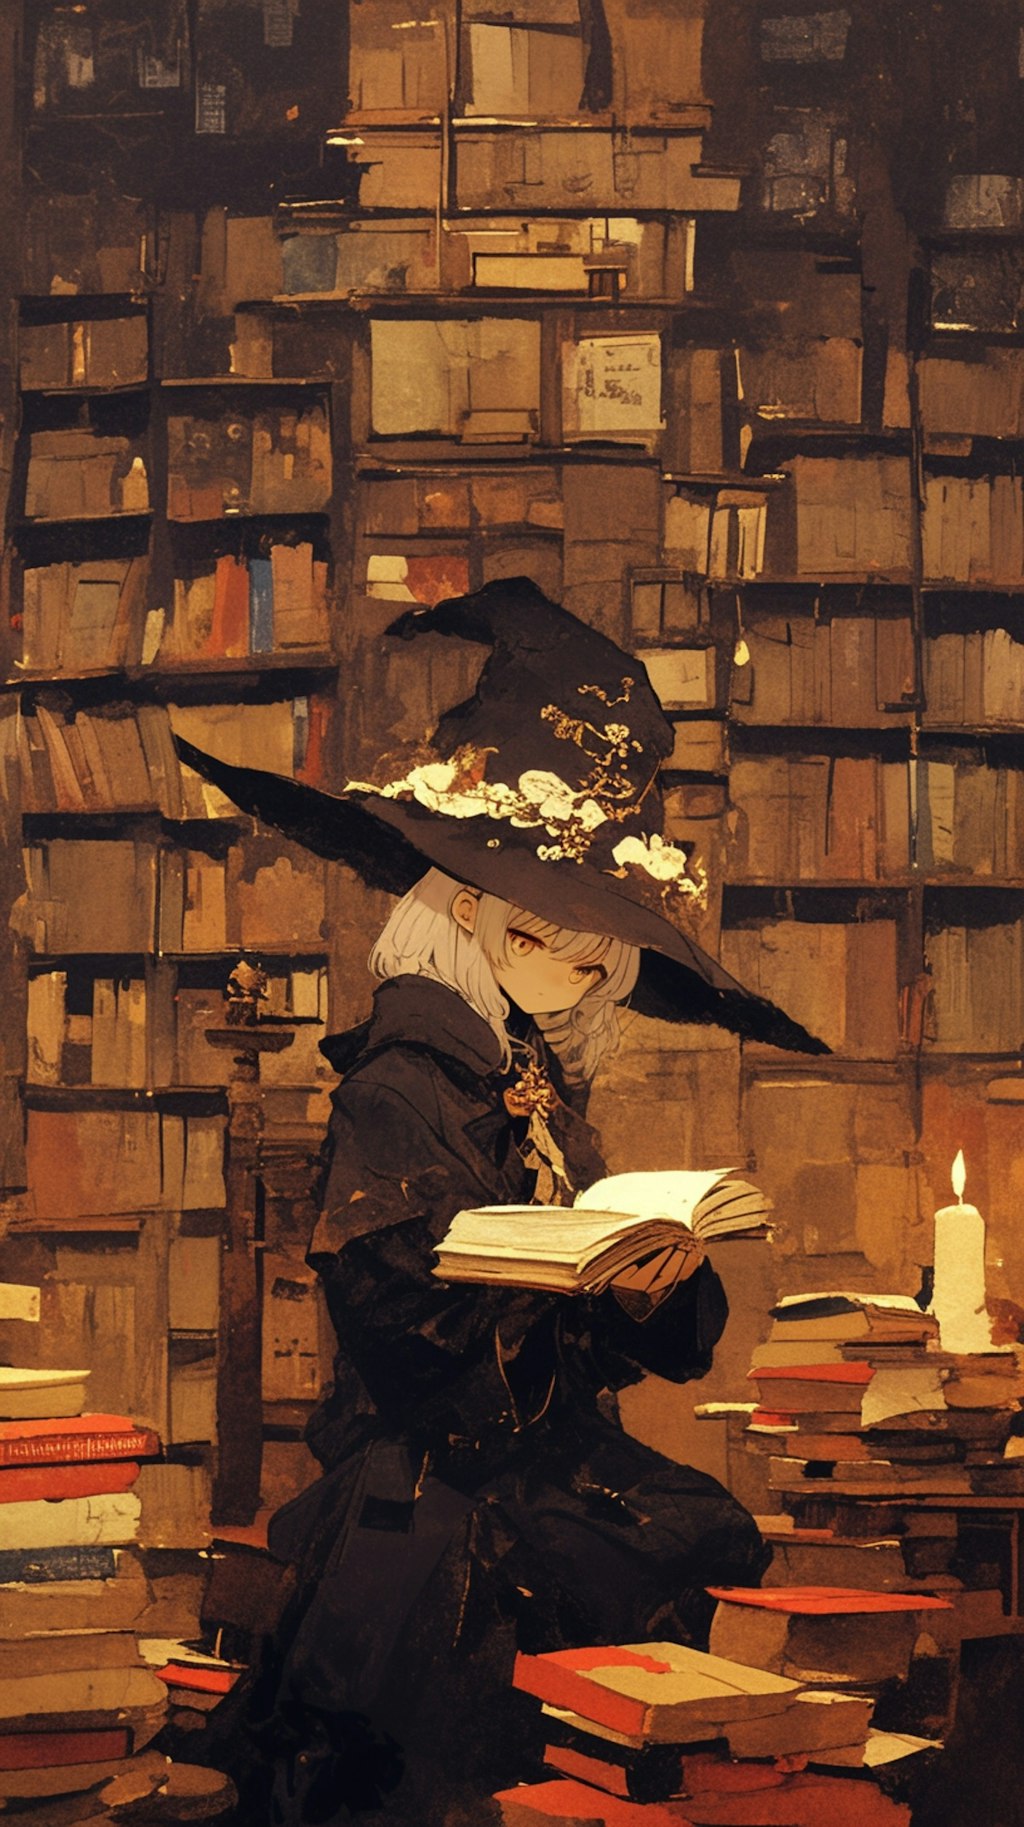 At the Forbidden Library